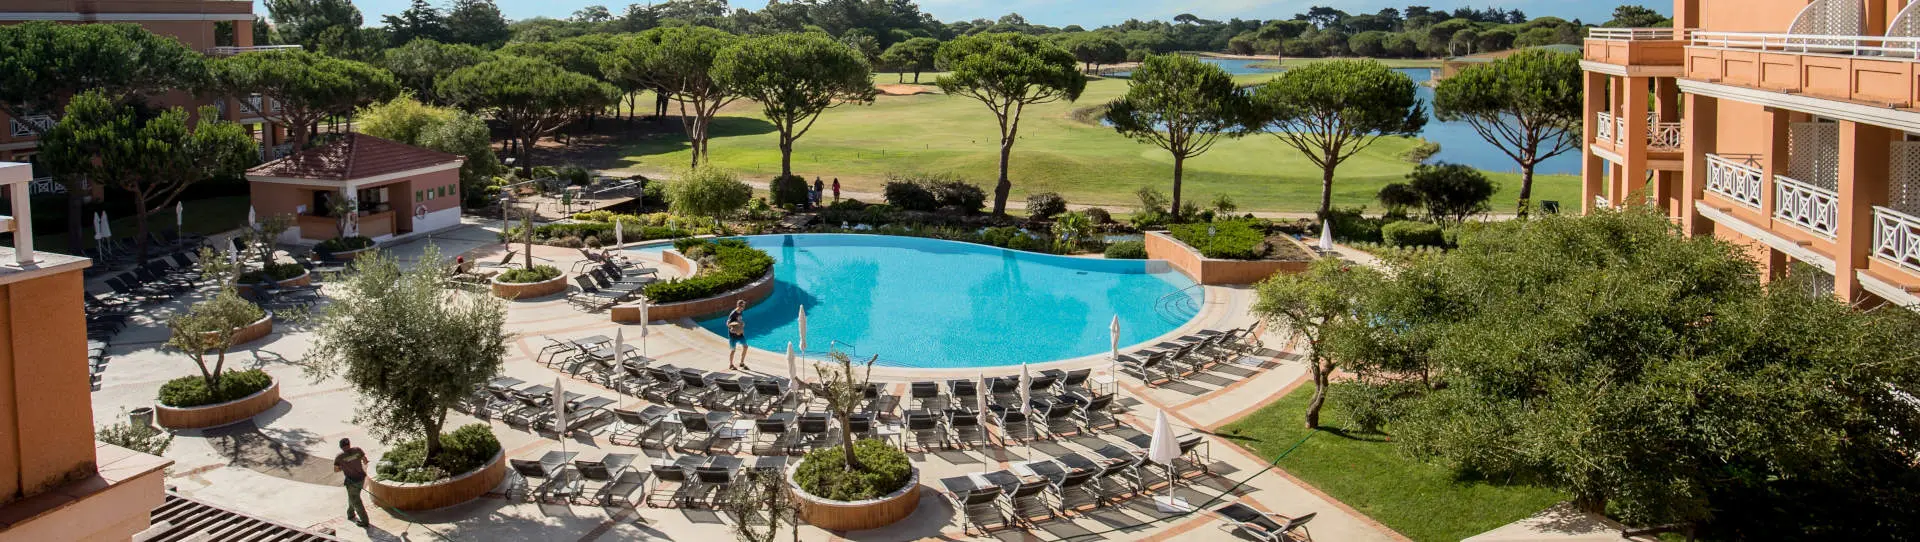 Portugal golf holidays - 7 Nights BB & 5 Golf Rounds <b>PRO Package</b> - Photo 1